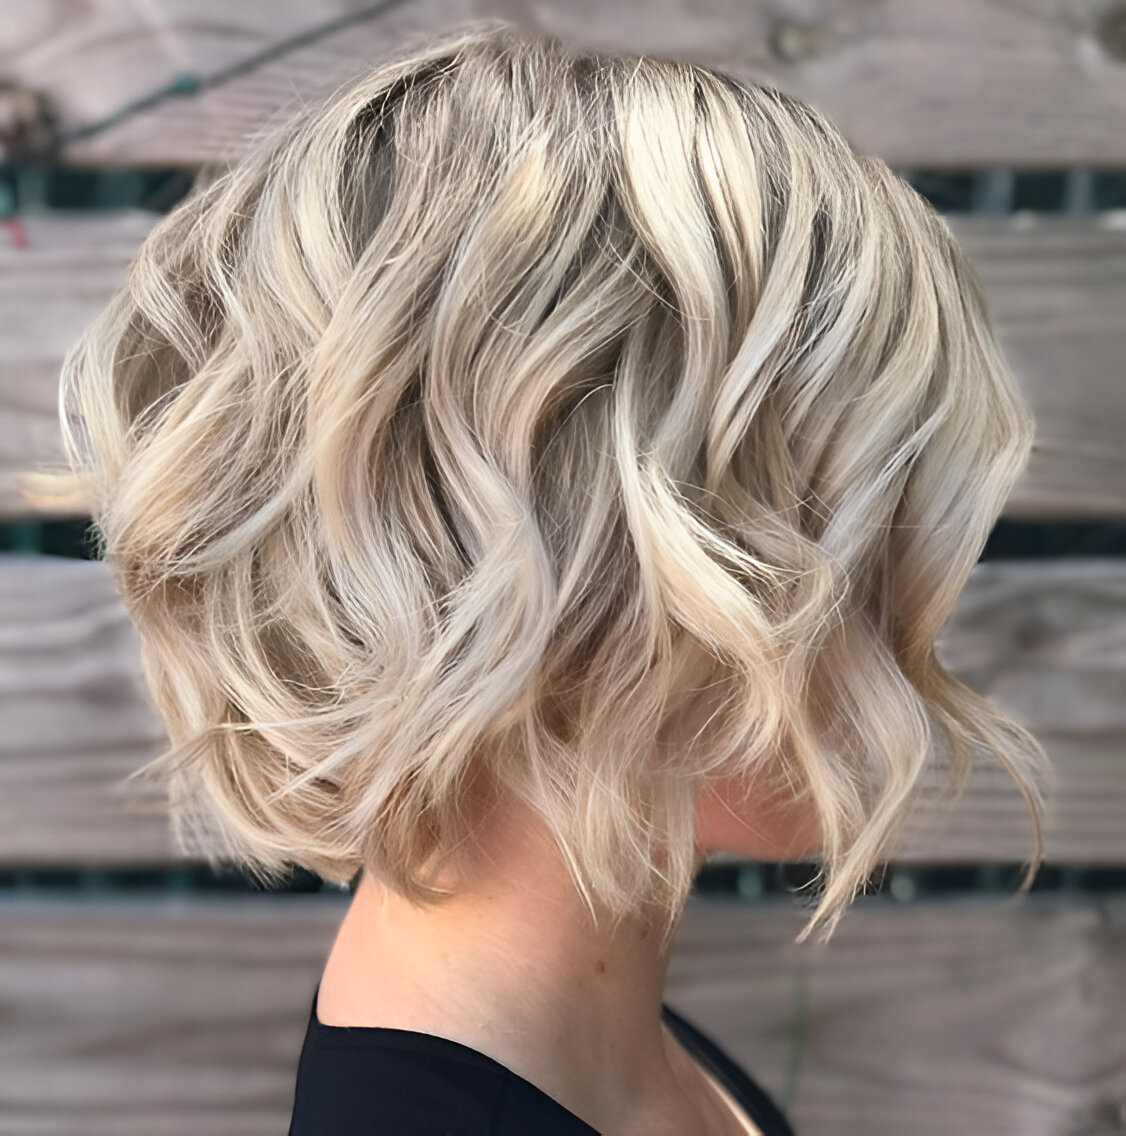 Curly Short Haircuts For Women